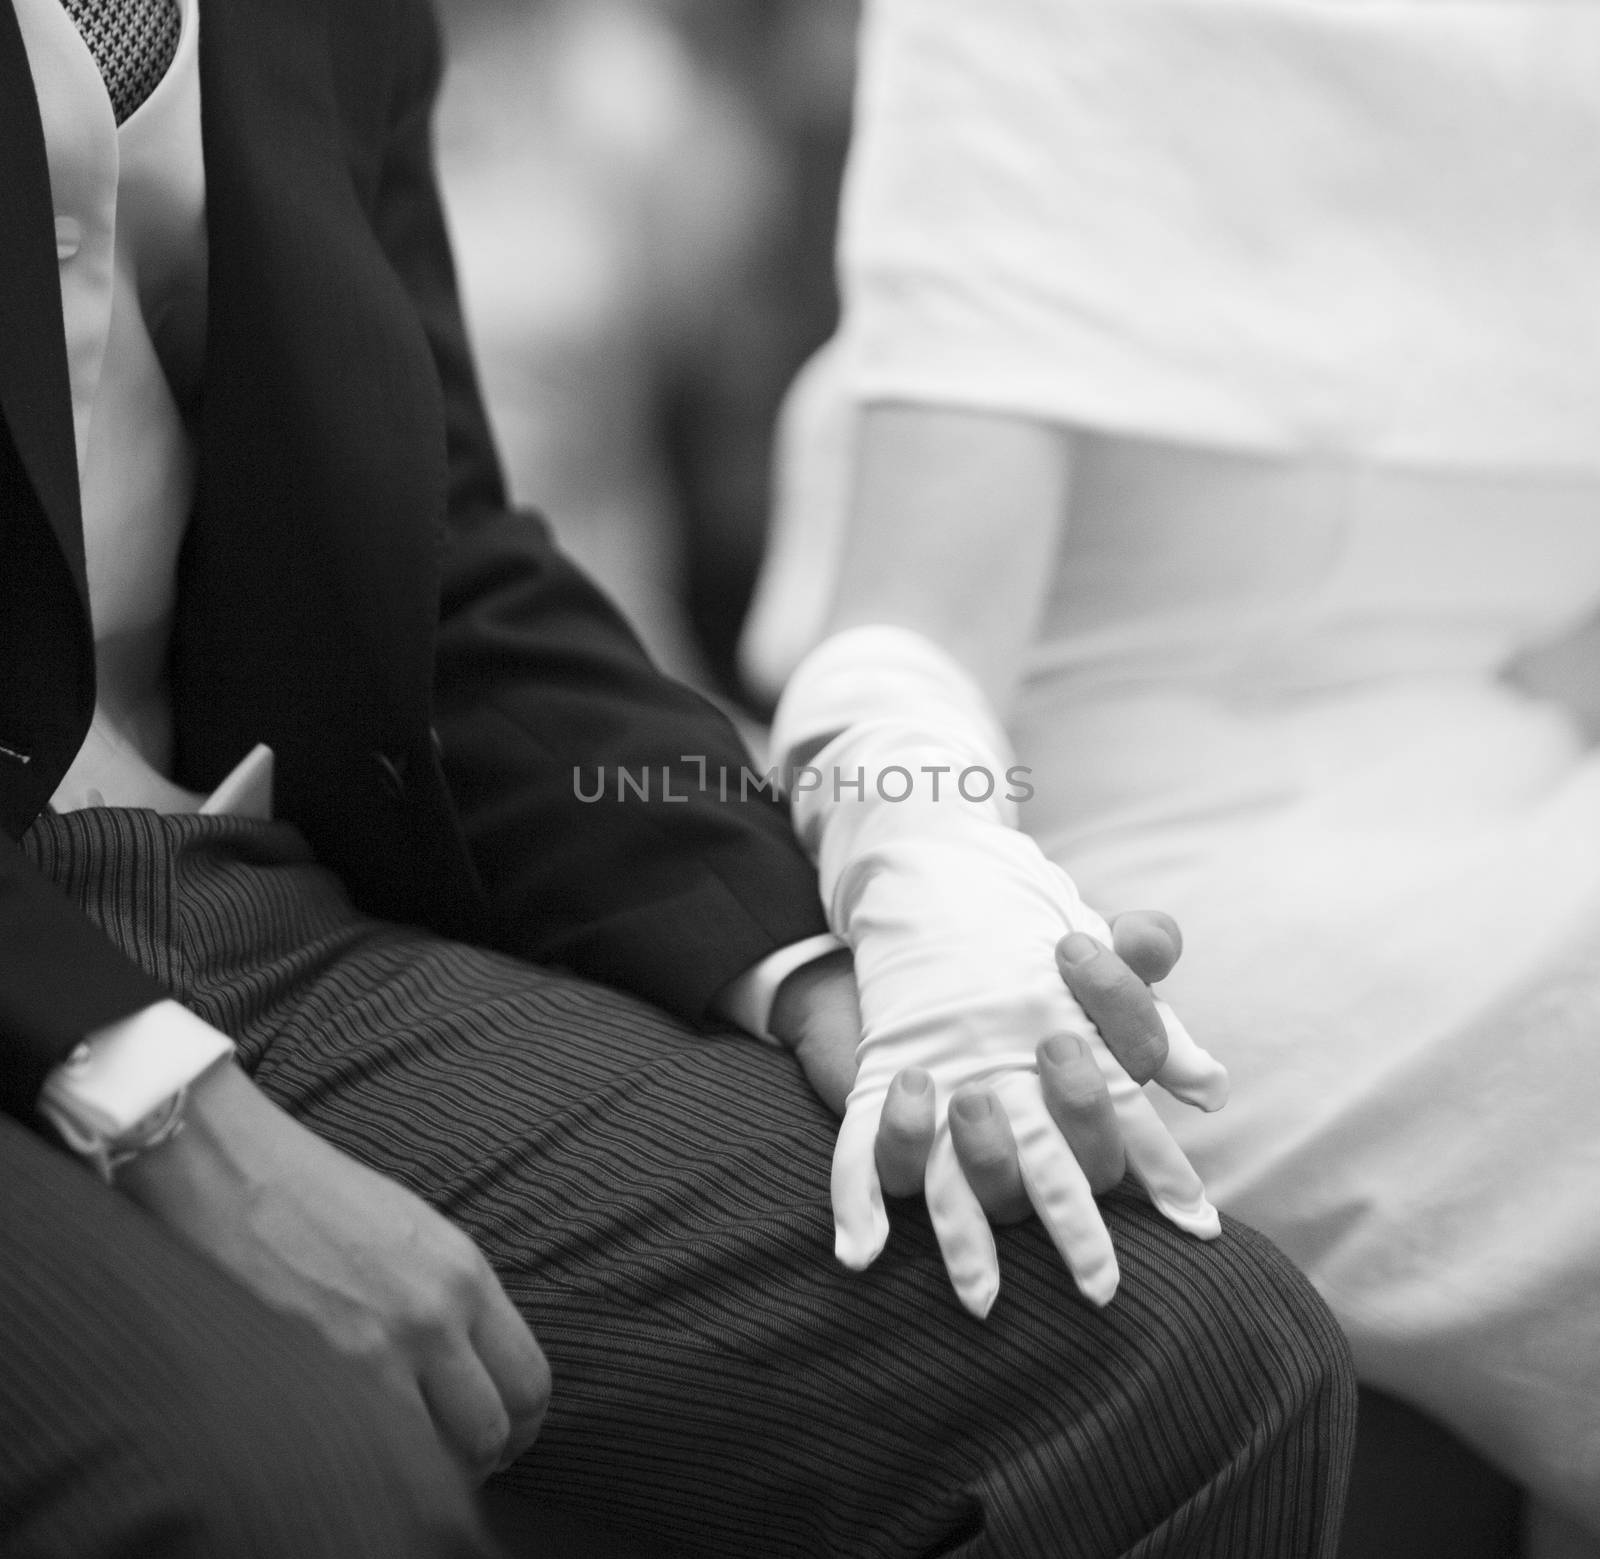 Black and white artistic digital photo of bridegroom in dark suit and white shirt in church religious wedding marriage ceremony holding hands with the bride in white long wedding bridal dress. Shallow depth of with background out of focus. 